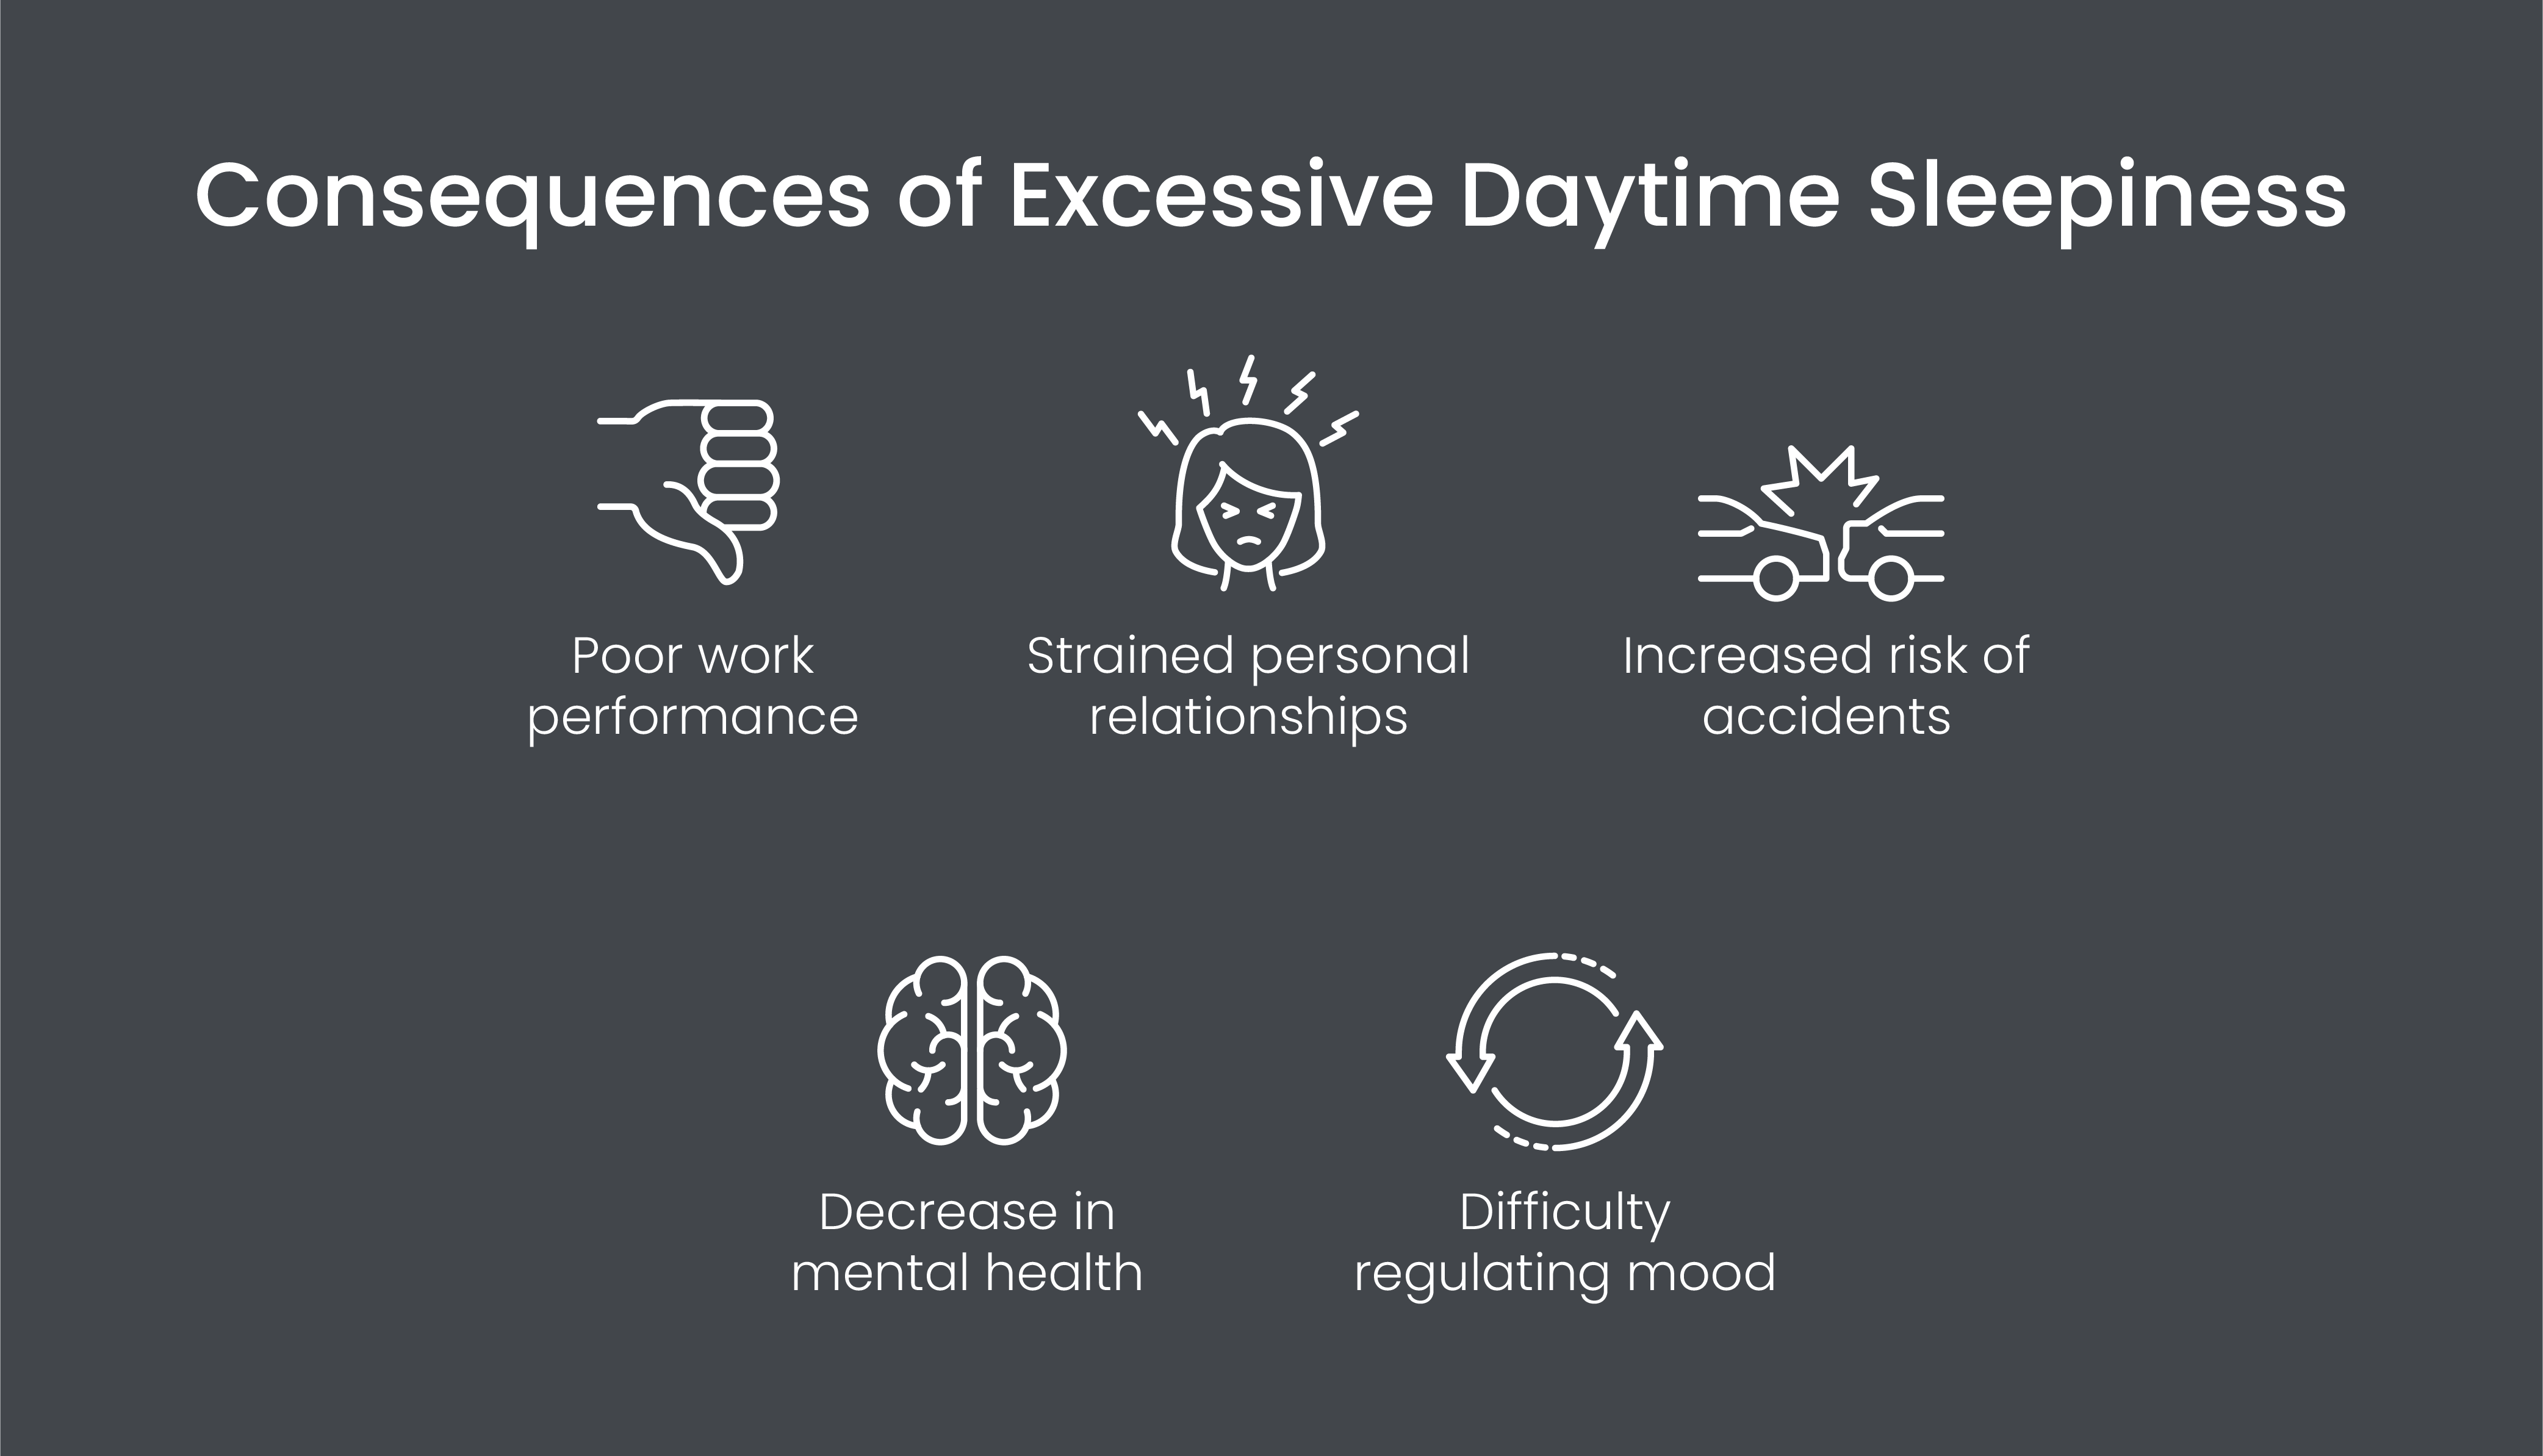 Consequences of excessive daytime sleepiness